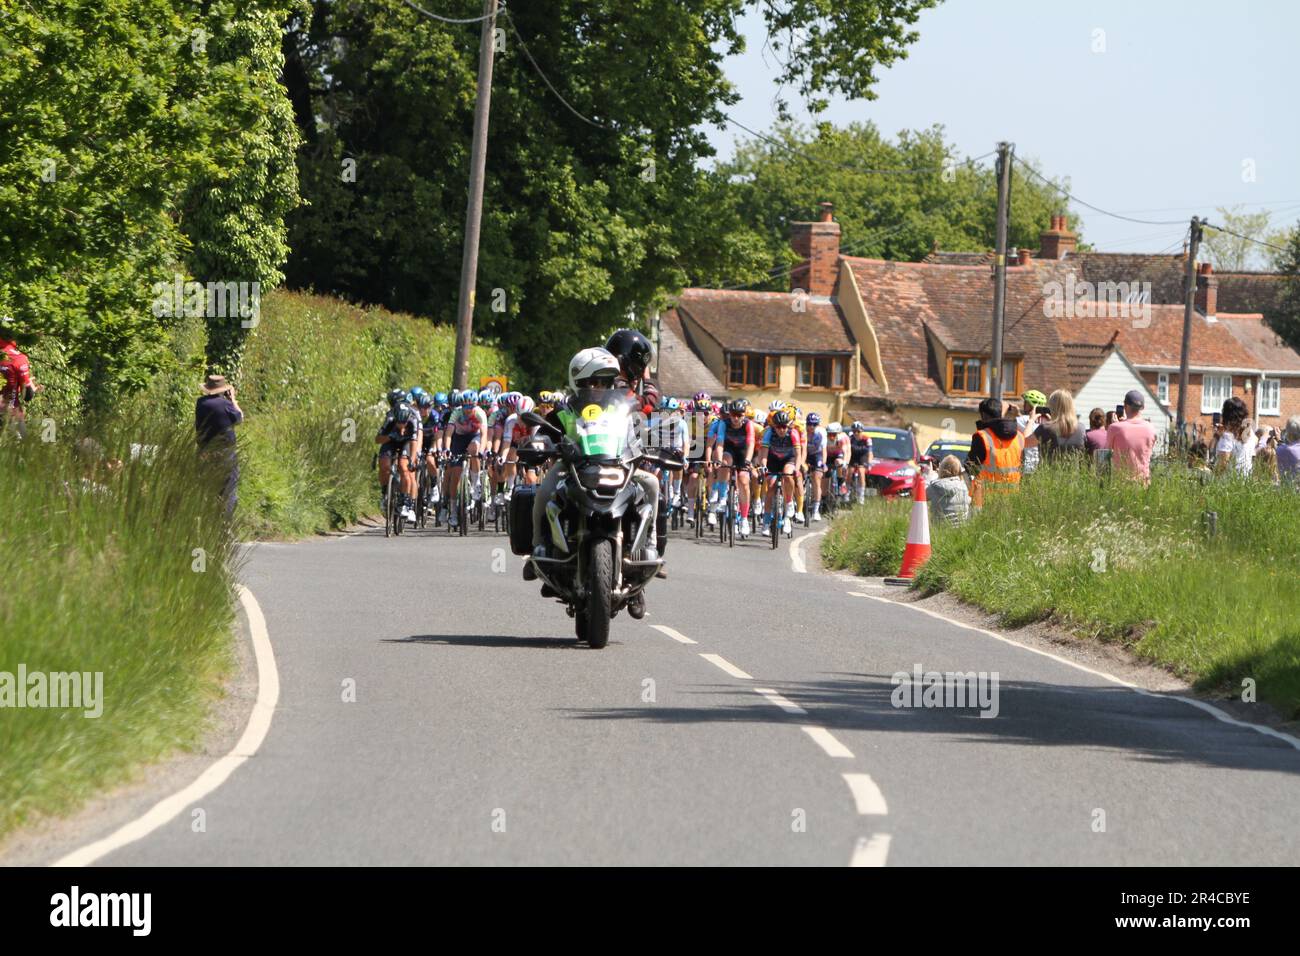 Layer-de-la-Haye, UK. 27th May 2023. Stage 2 of the RideLondon Classique is taking place today. The stage begins and ends in Maldon with the route taking in the Essex countryside nearby. Here the riders are passing through the village of Layer-de-la-Haye near Colchester. Credit:Eastern Views/Alamy Live News Stock Photo